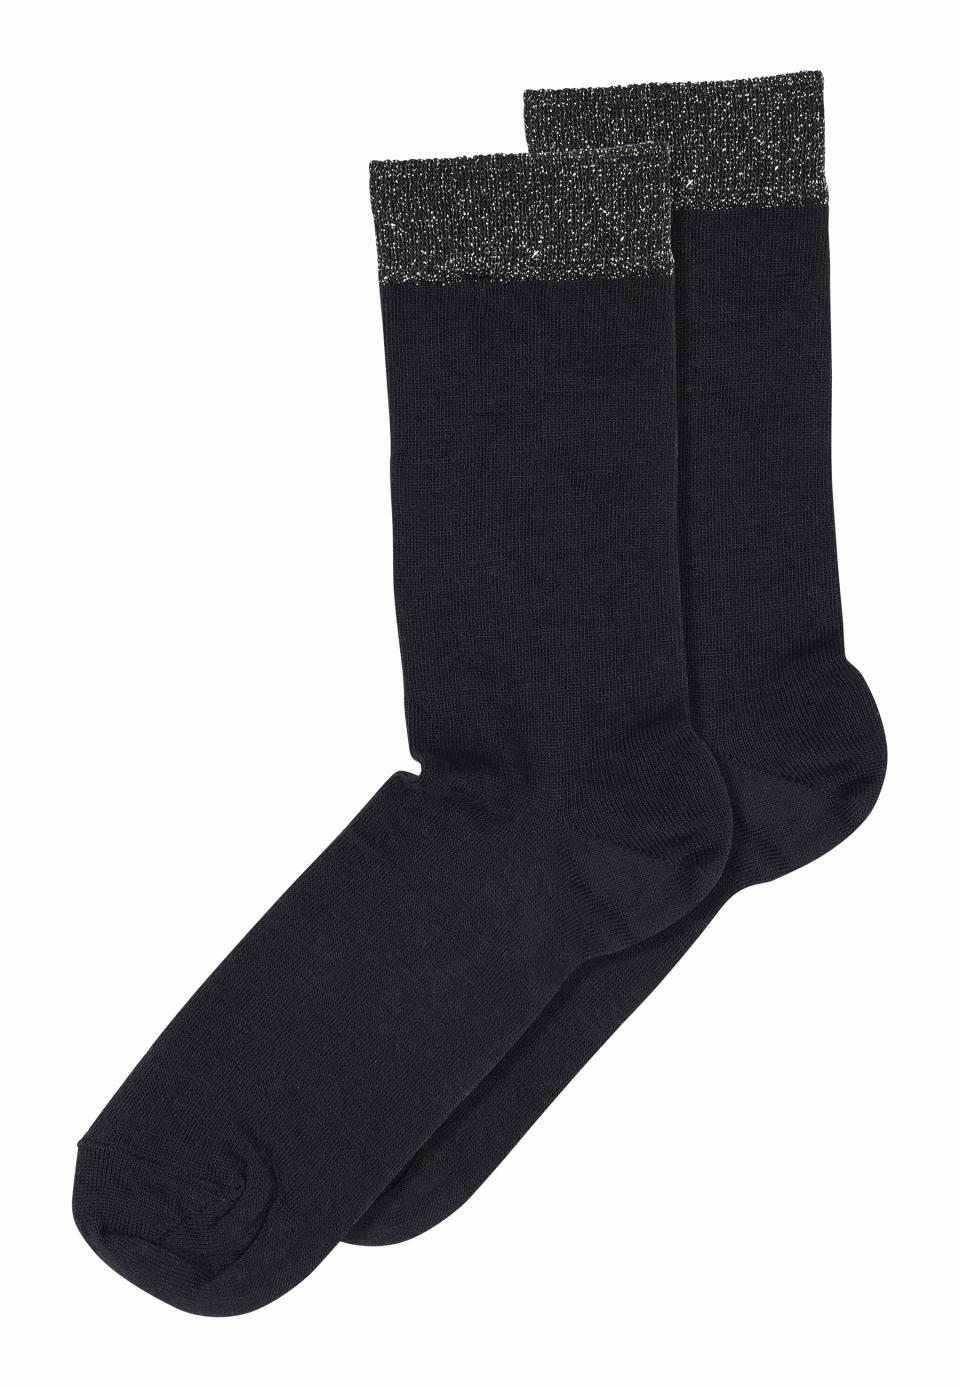 MP Wool & Silk Ankle Socks - Warm and soft thermal knee high sock with a sparkly silver lam̩ ribbed cuff.